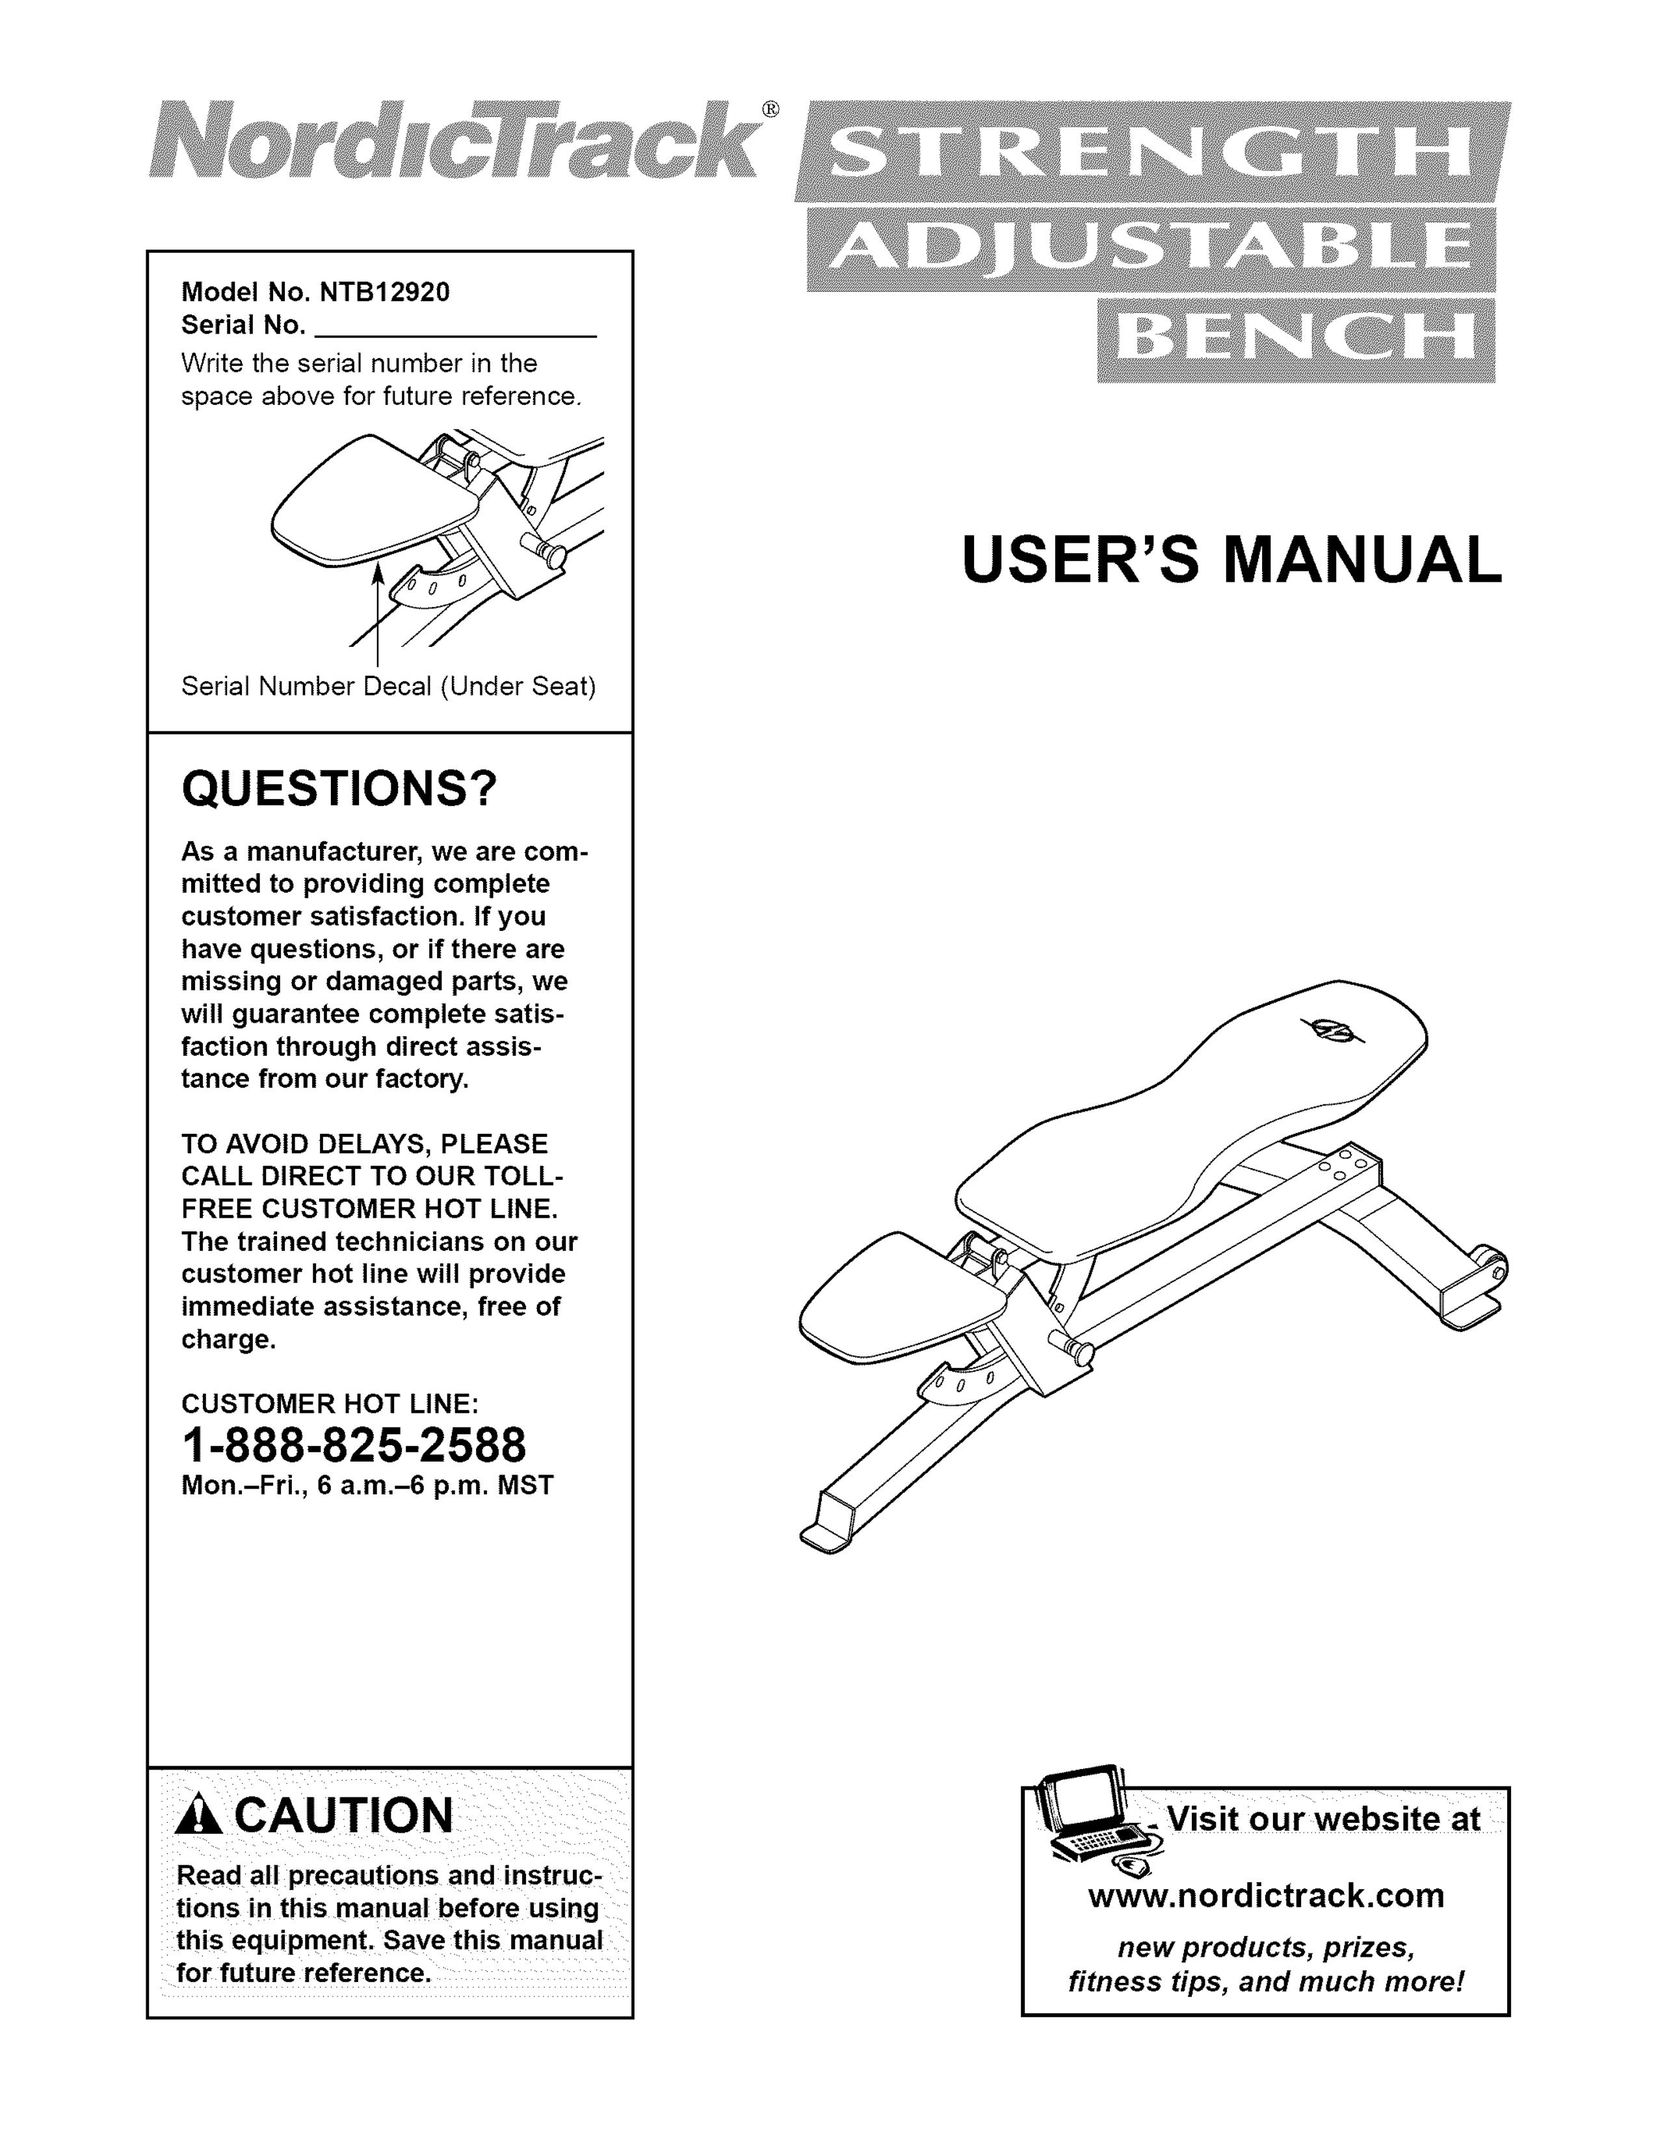 NordicTrack NTB12920 Fitness Equipment User Manual